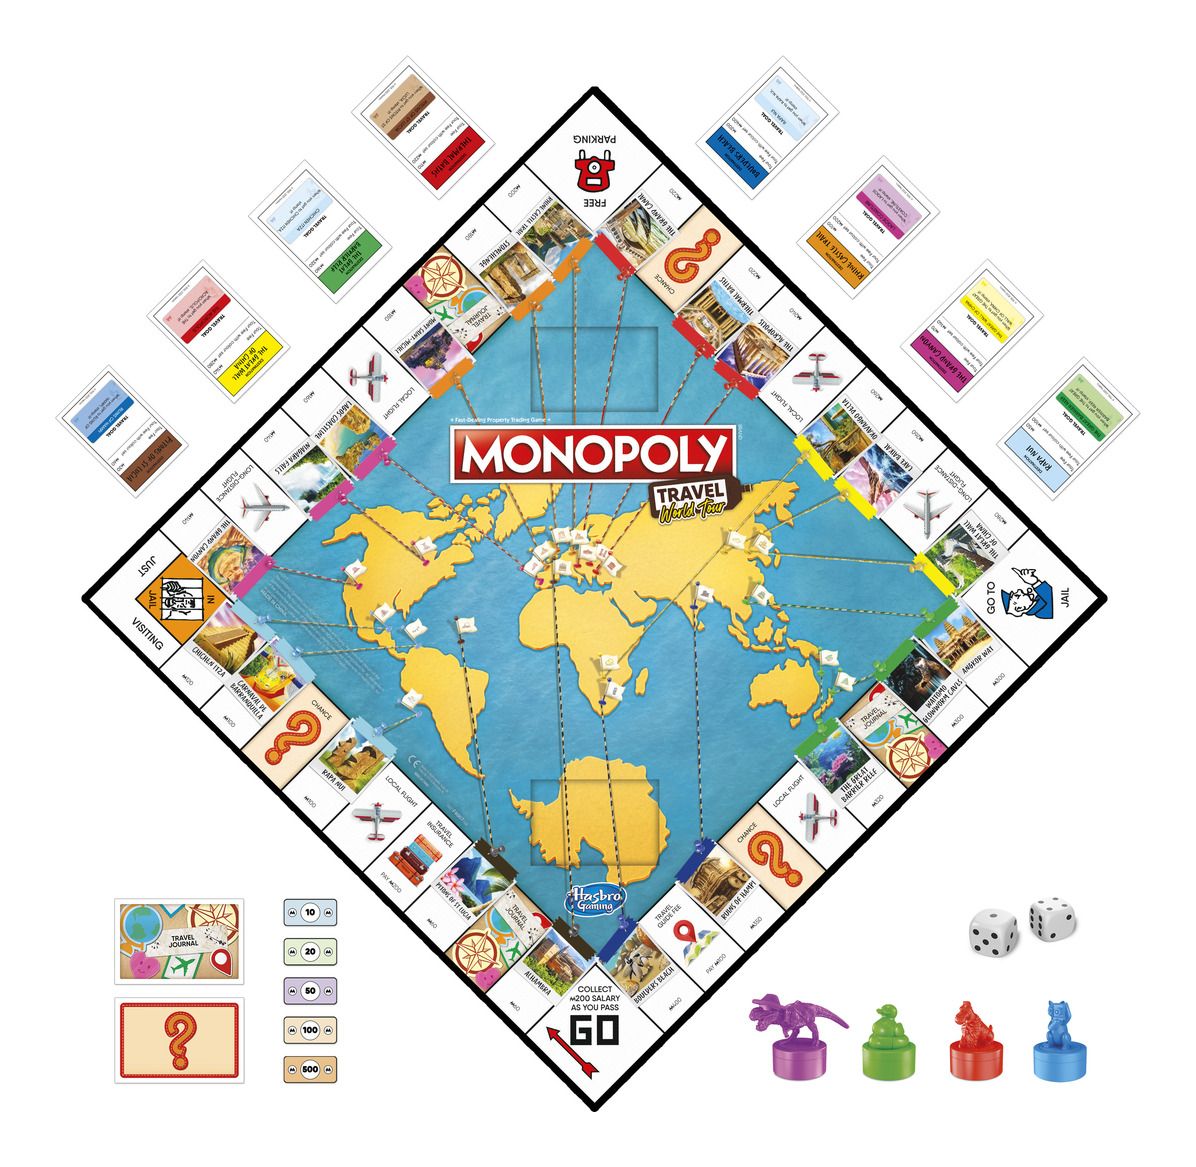 The Monopoly Travel World Tour board game is a twist on classic Monopoly board gameplay! Sold by Board Hoarders